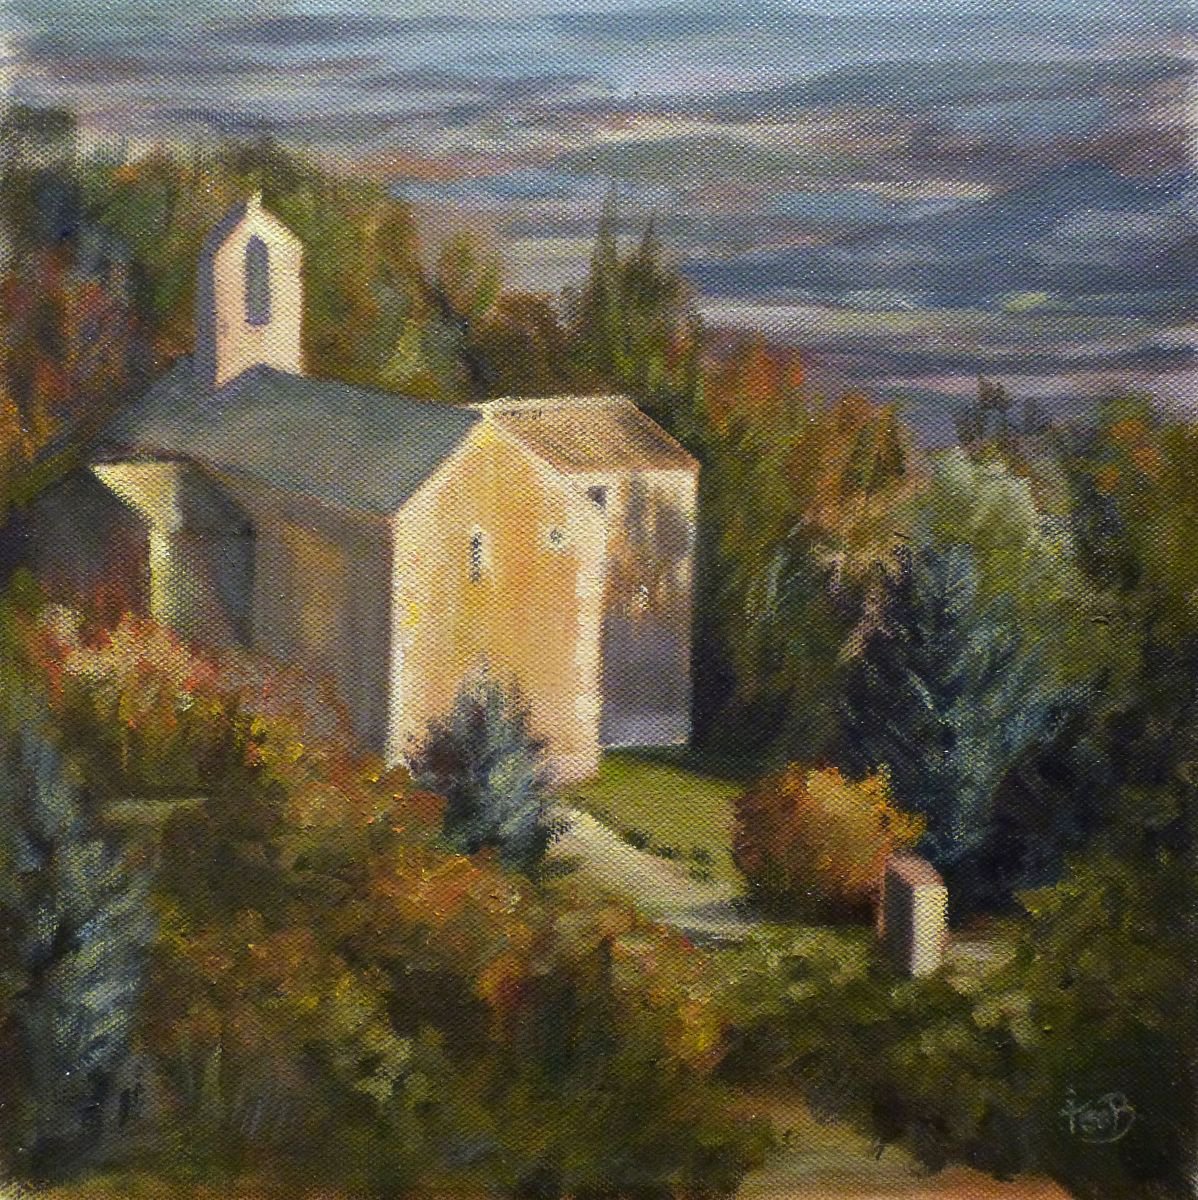 Small chapel in Provence by Isabelle Boulanger